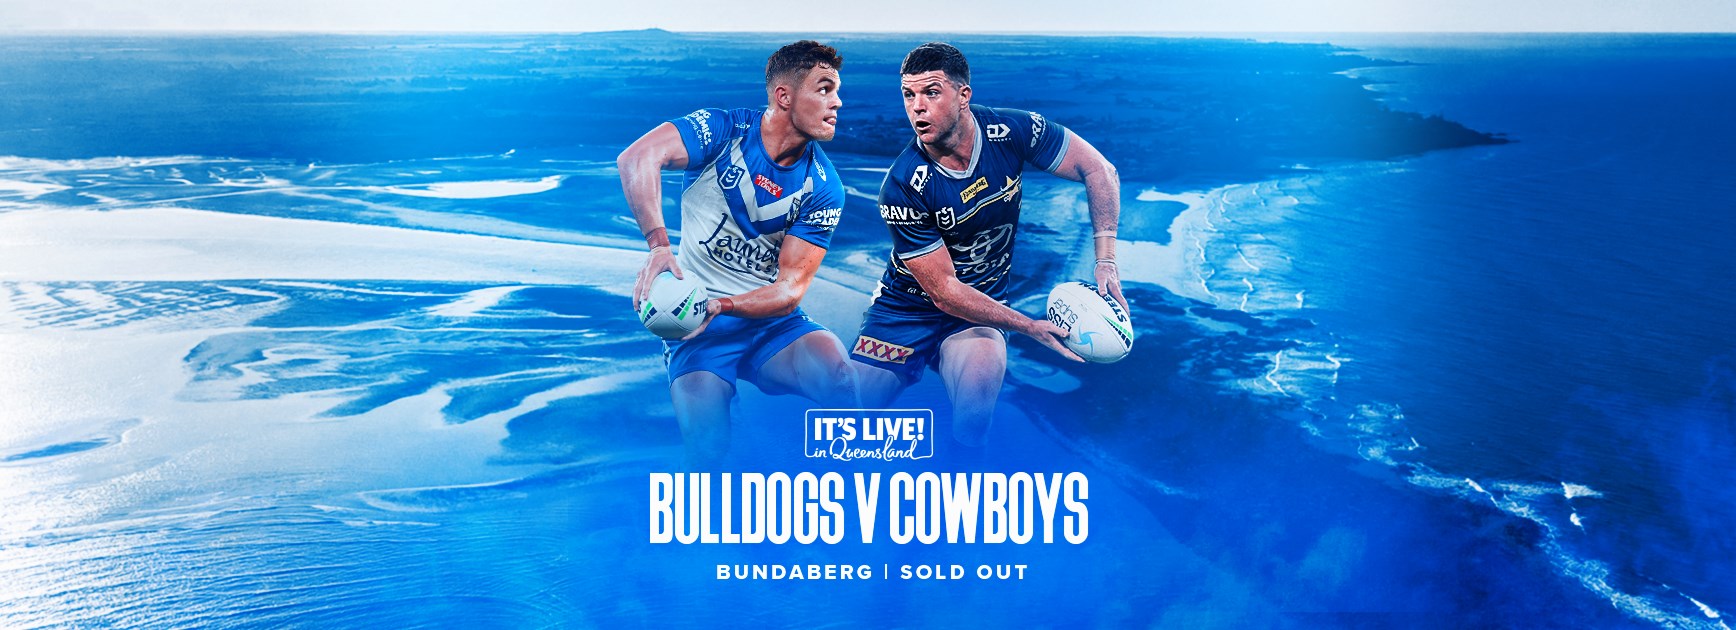 Tickets sold out for upcoming Bundaberg fixture